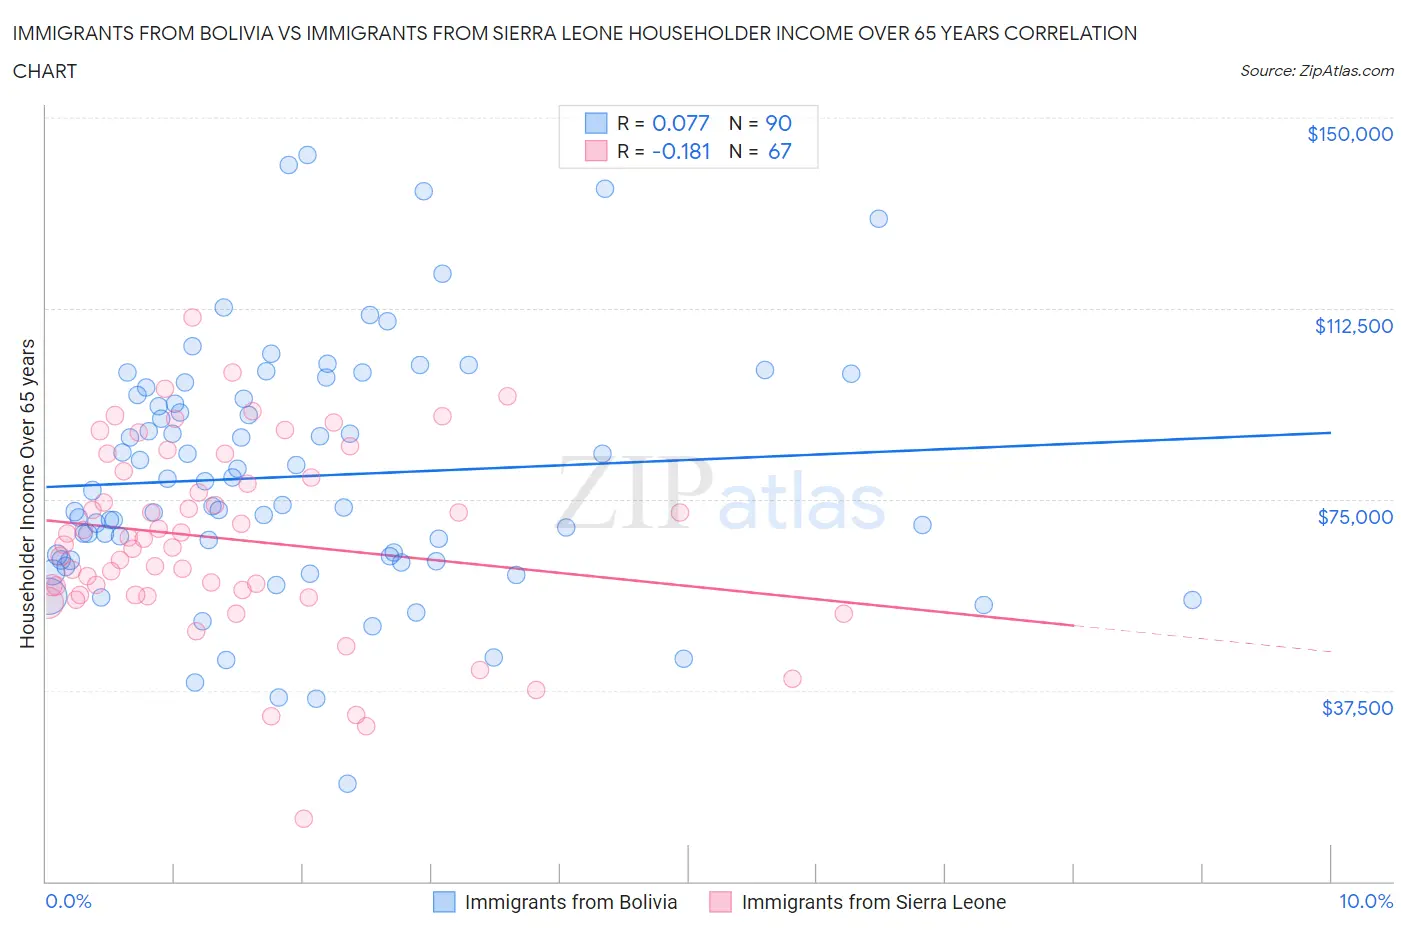 Immigrants from Bolivia vs Immigrants from Sierra Leone Householder Income Over 65 years